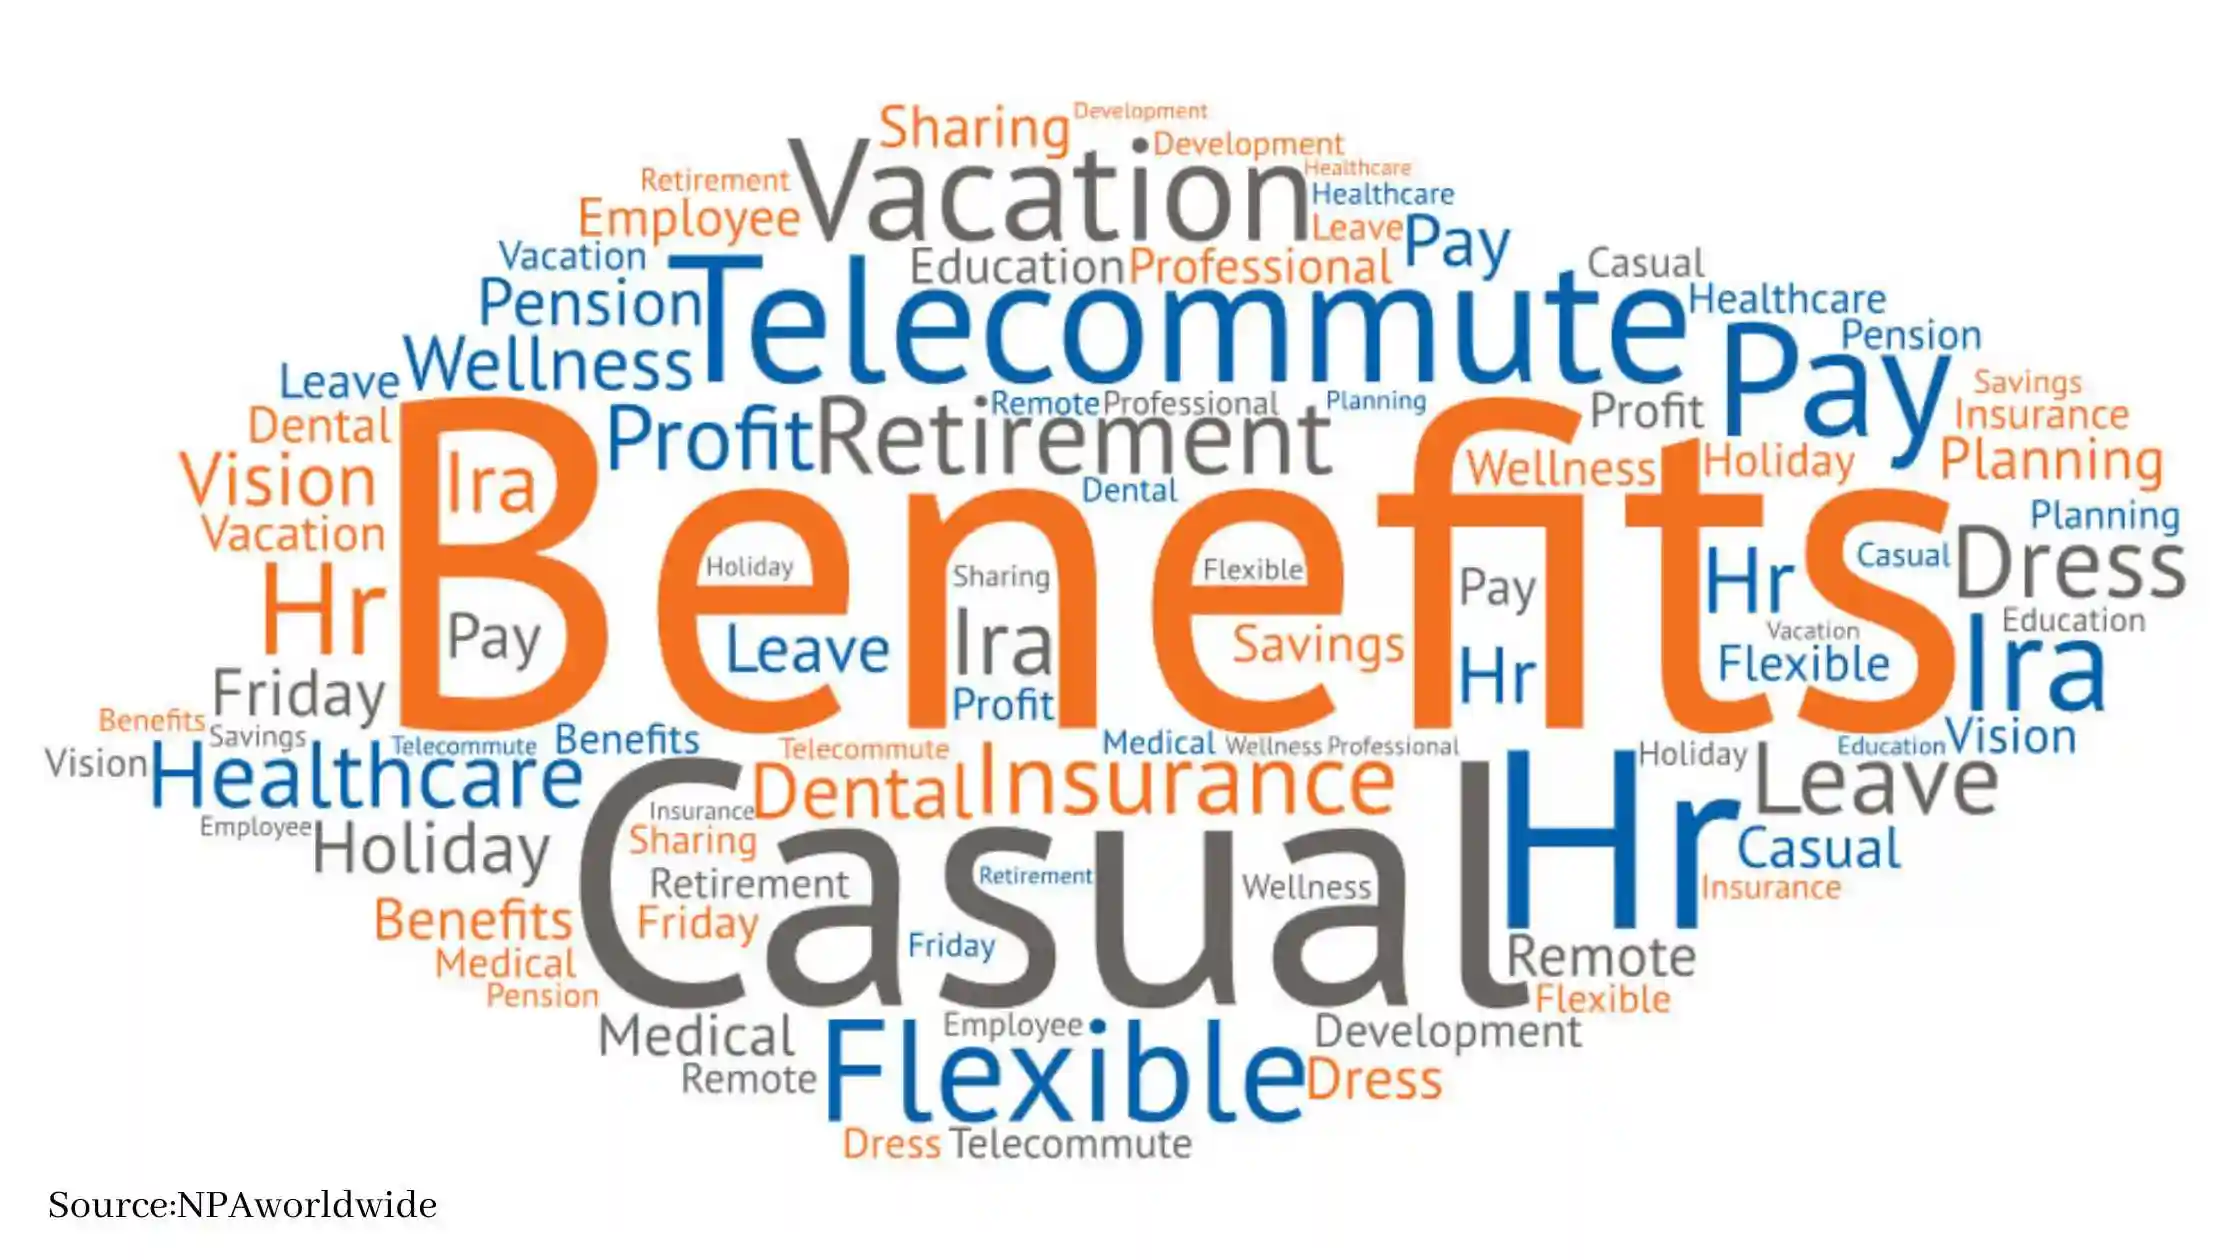 Invest in an incredible staff benefits program